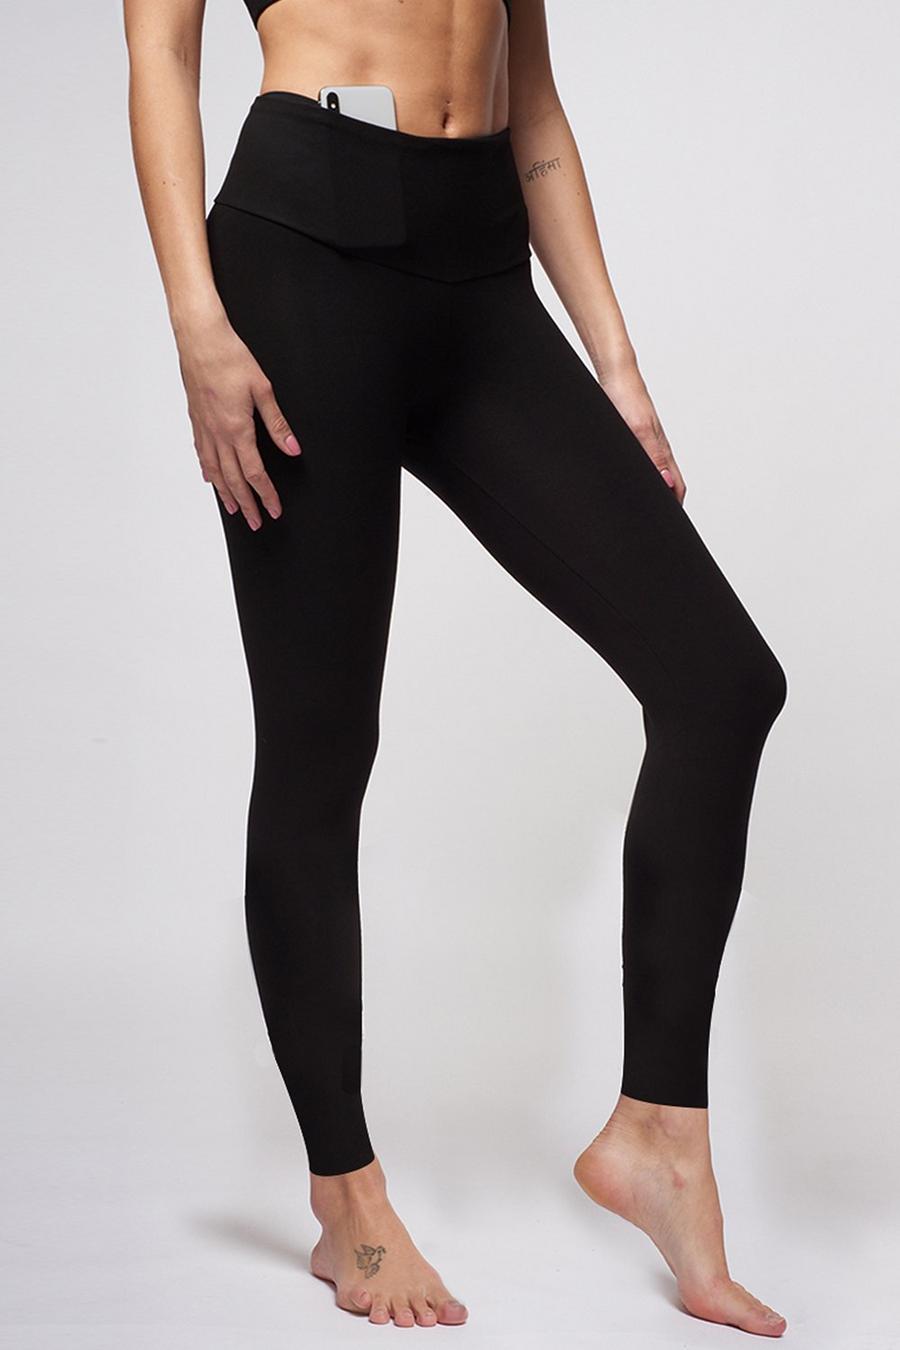 Black Extra Strong Compression Leggings with Figure Firming